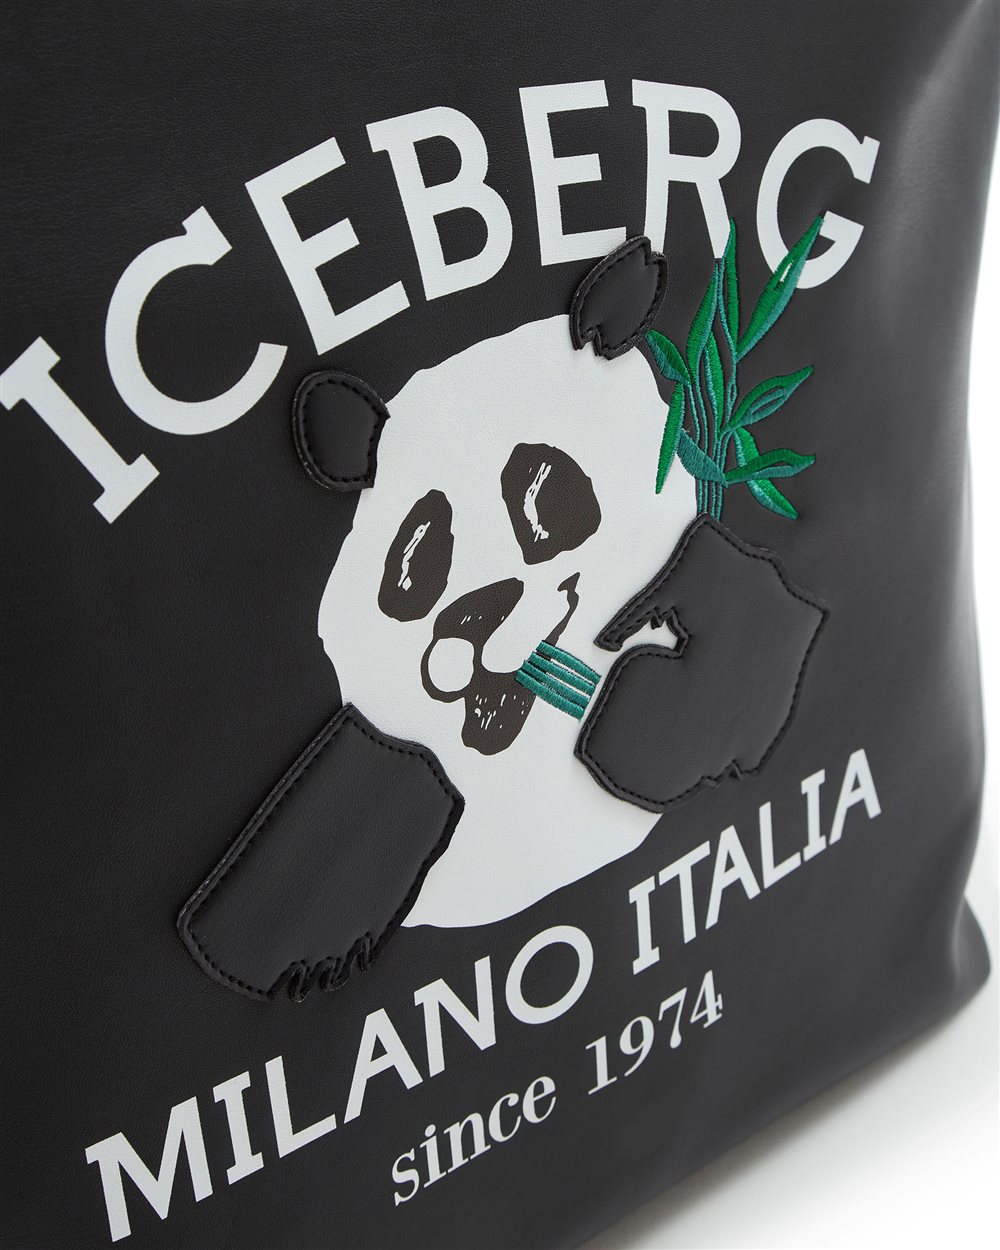 Shopper with logo and Panda - Iceberg - Official Website